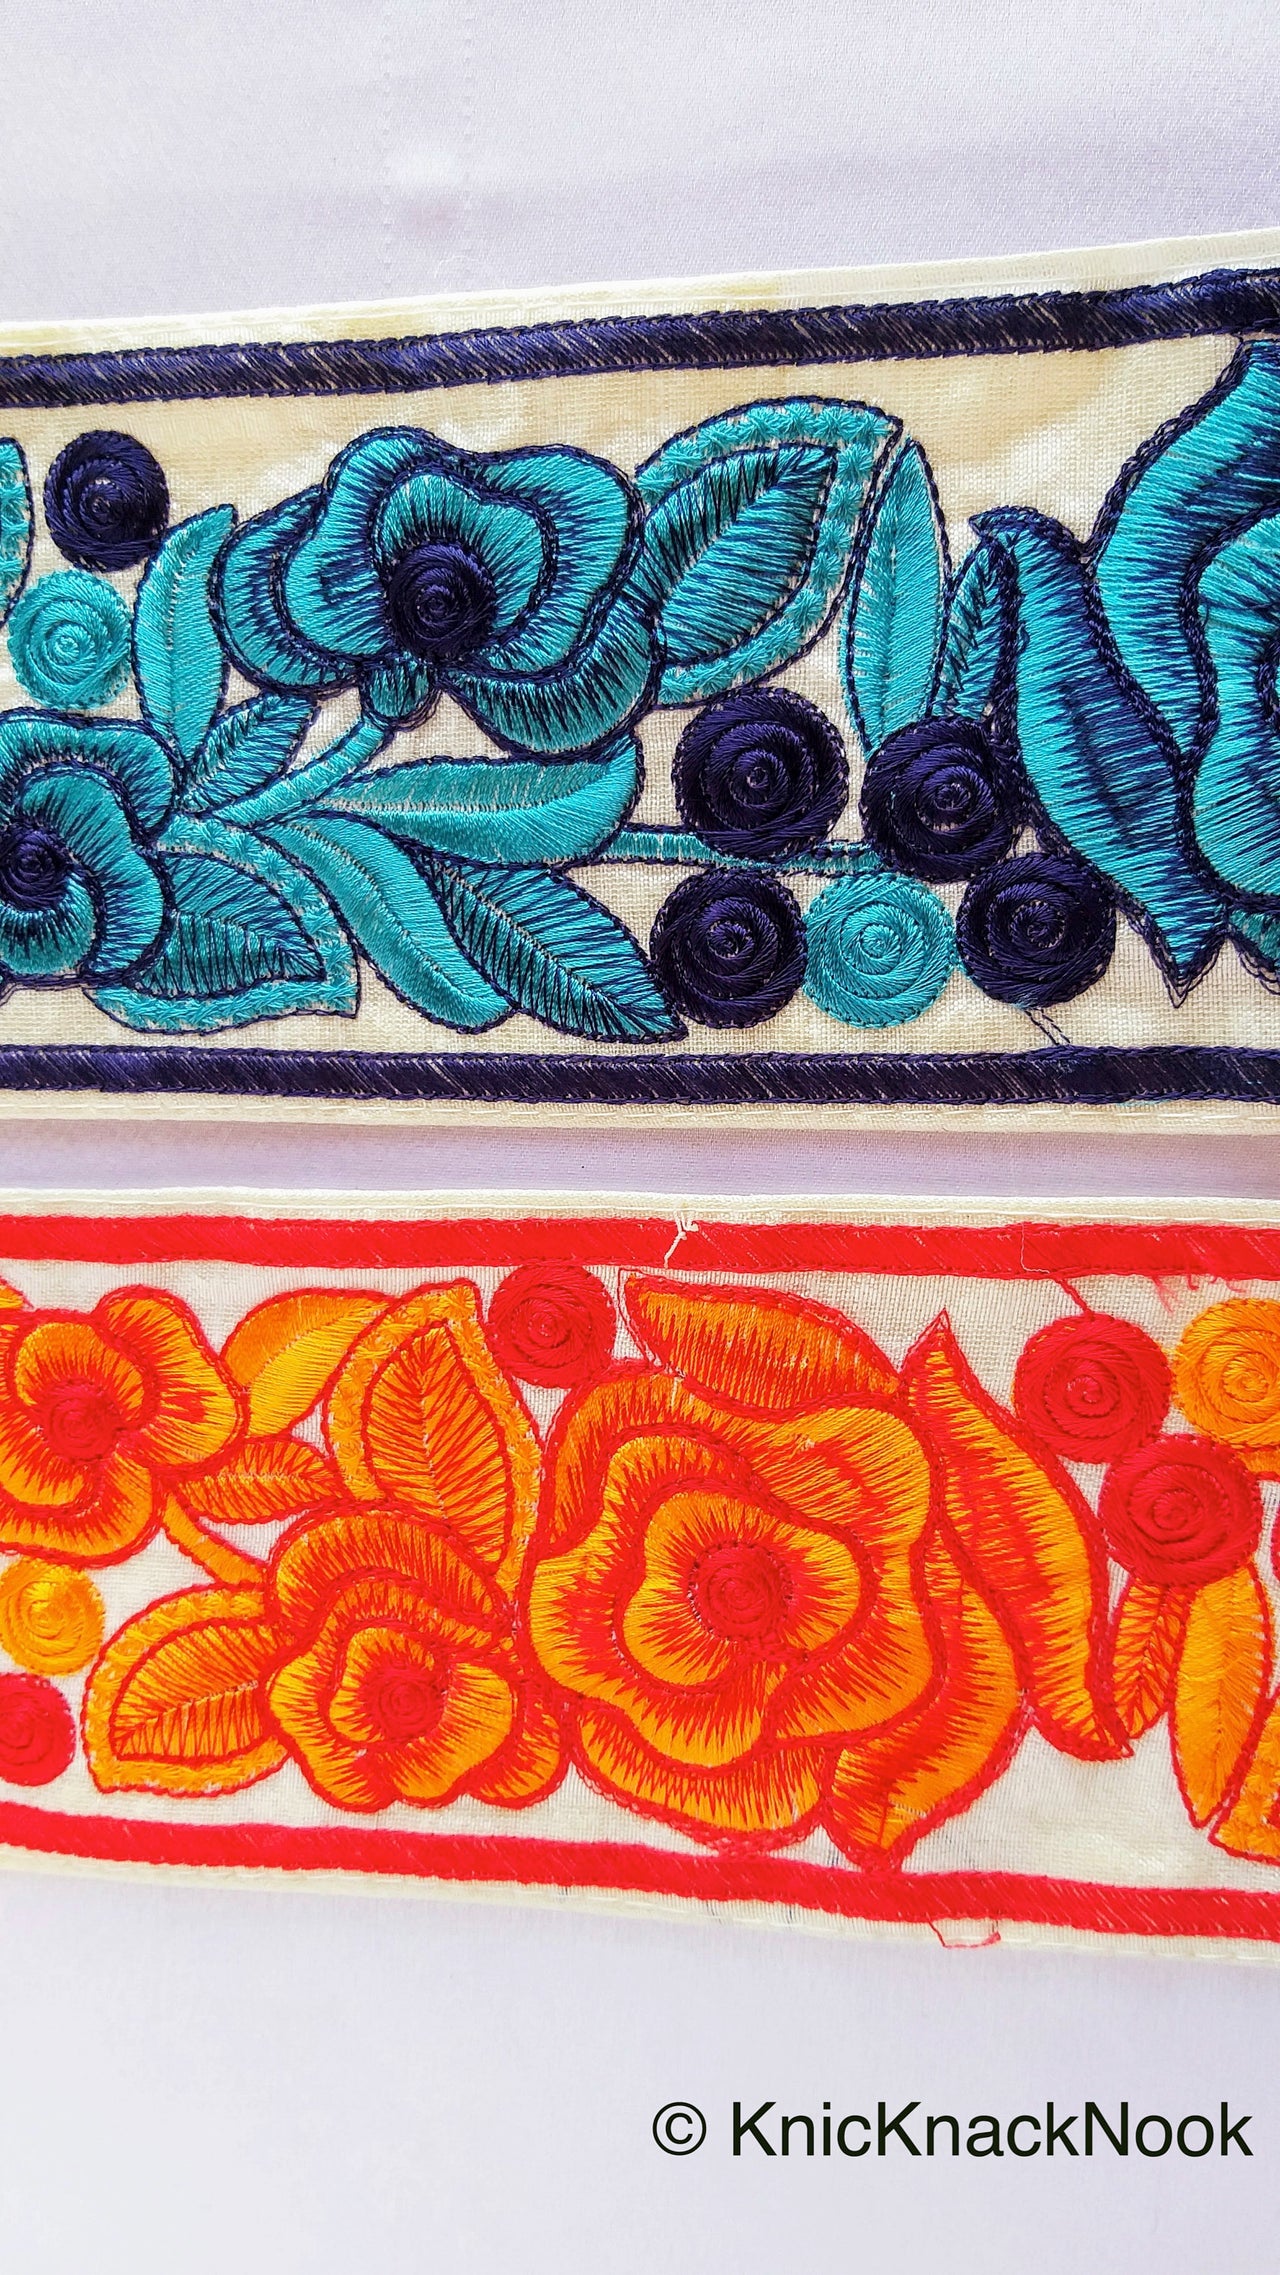 Off White Cotton, Fabric Trim With Floral Embroidery In Blue / Orange, Approx. 90mm wide - 210119L502 / 03Trim